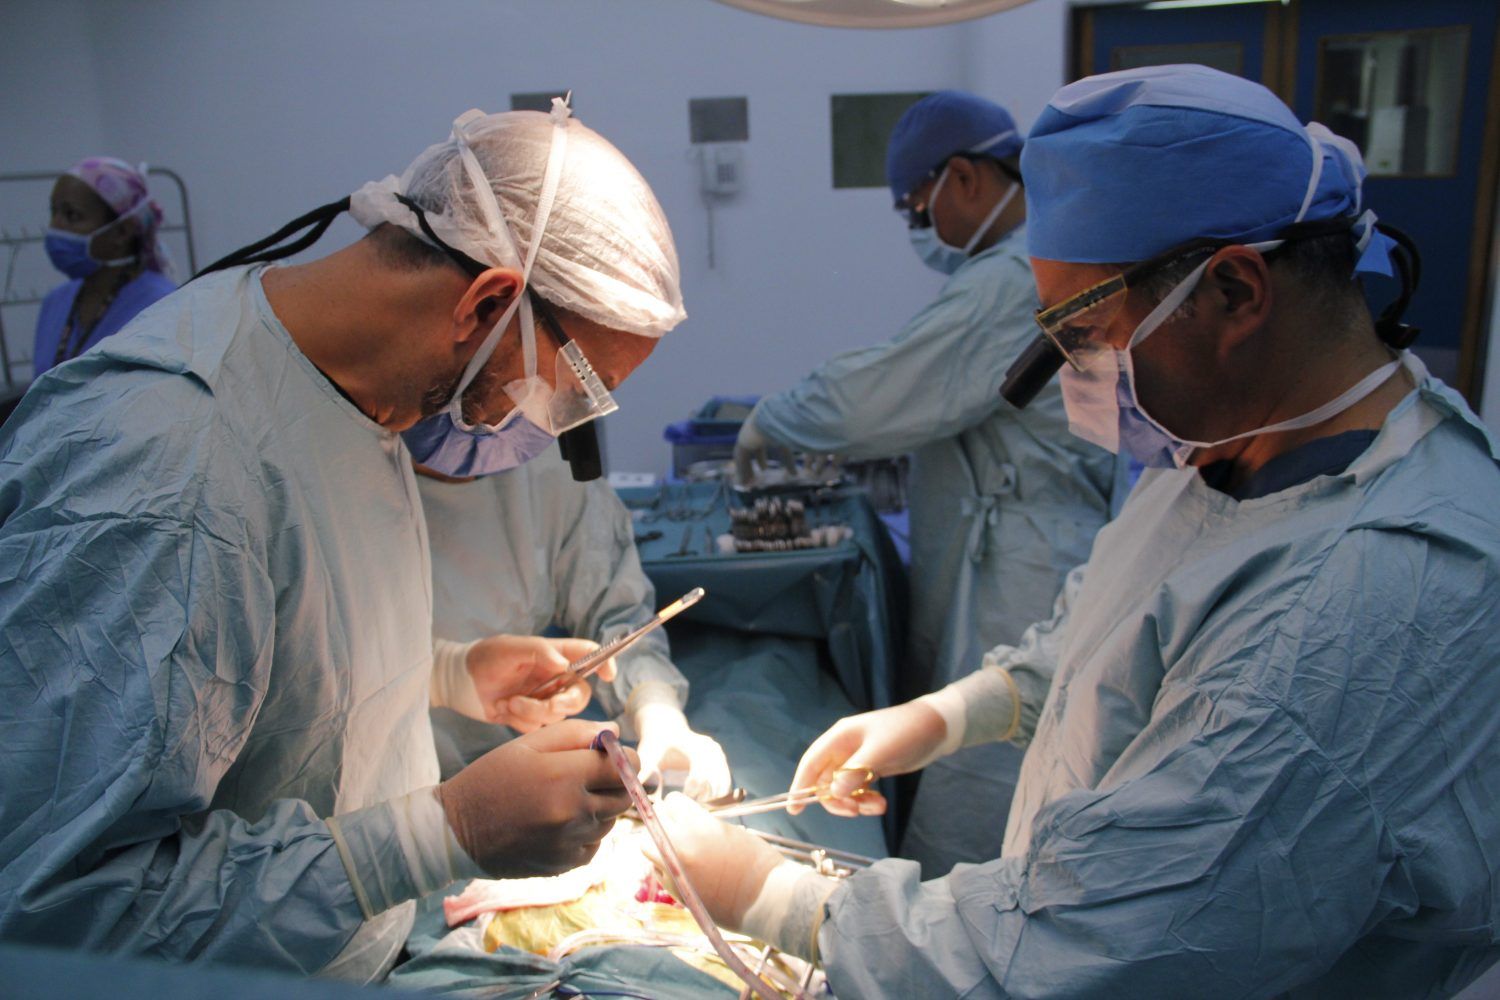 Flaviana Sandoval spent six weeks investigating Venezuela’s organ transplant crisis, and reported from inside this operating room at one of the few hospitals still performing the procedures. Here, surgeons Pedro Rivas (left) and Carlos Rodríguez (right) are in the midst of a kidney transplant at the private hospital Clínica Metropolitana. Image by Flaviana Sandoval. Venezuela, 2018.